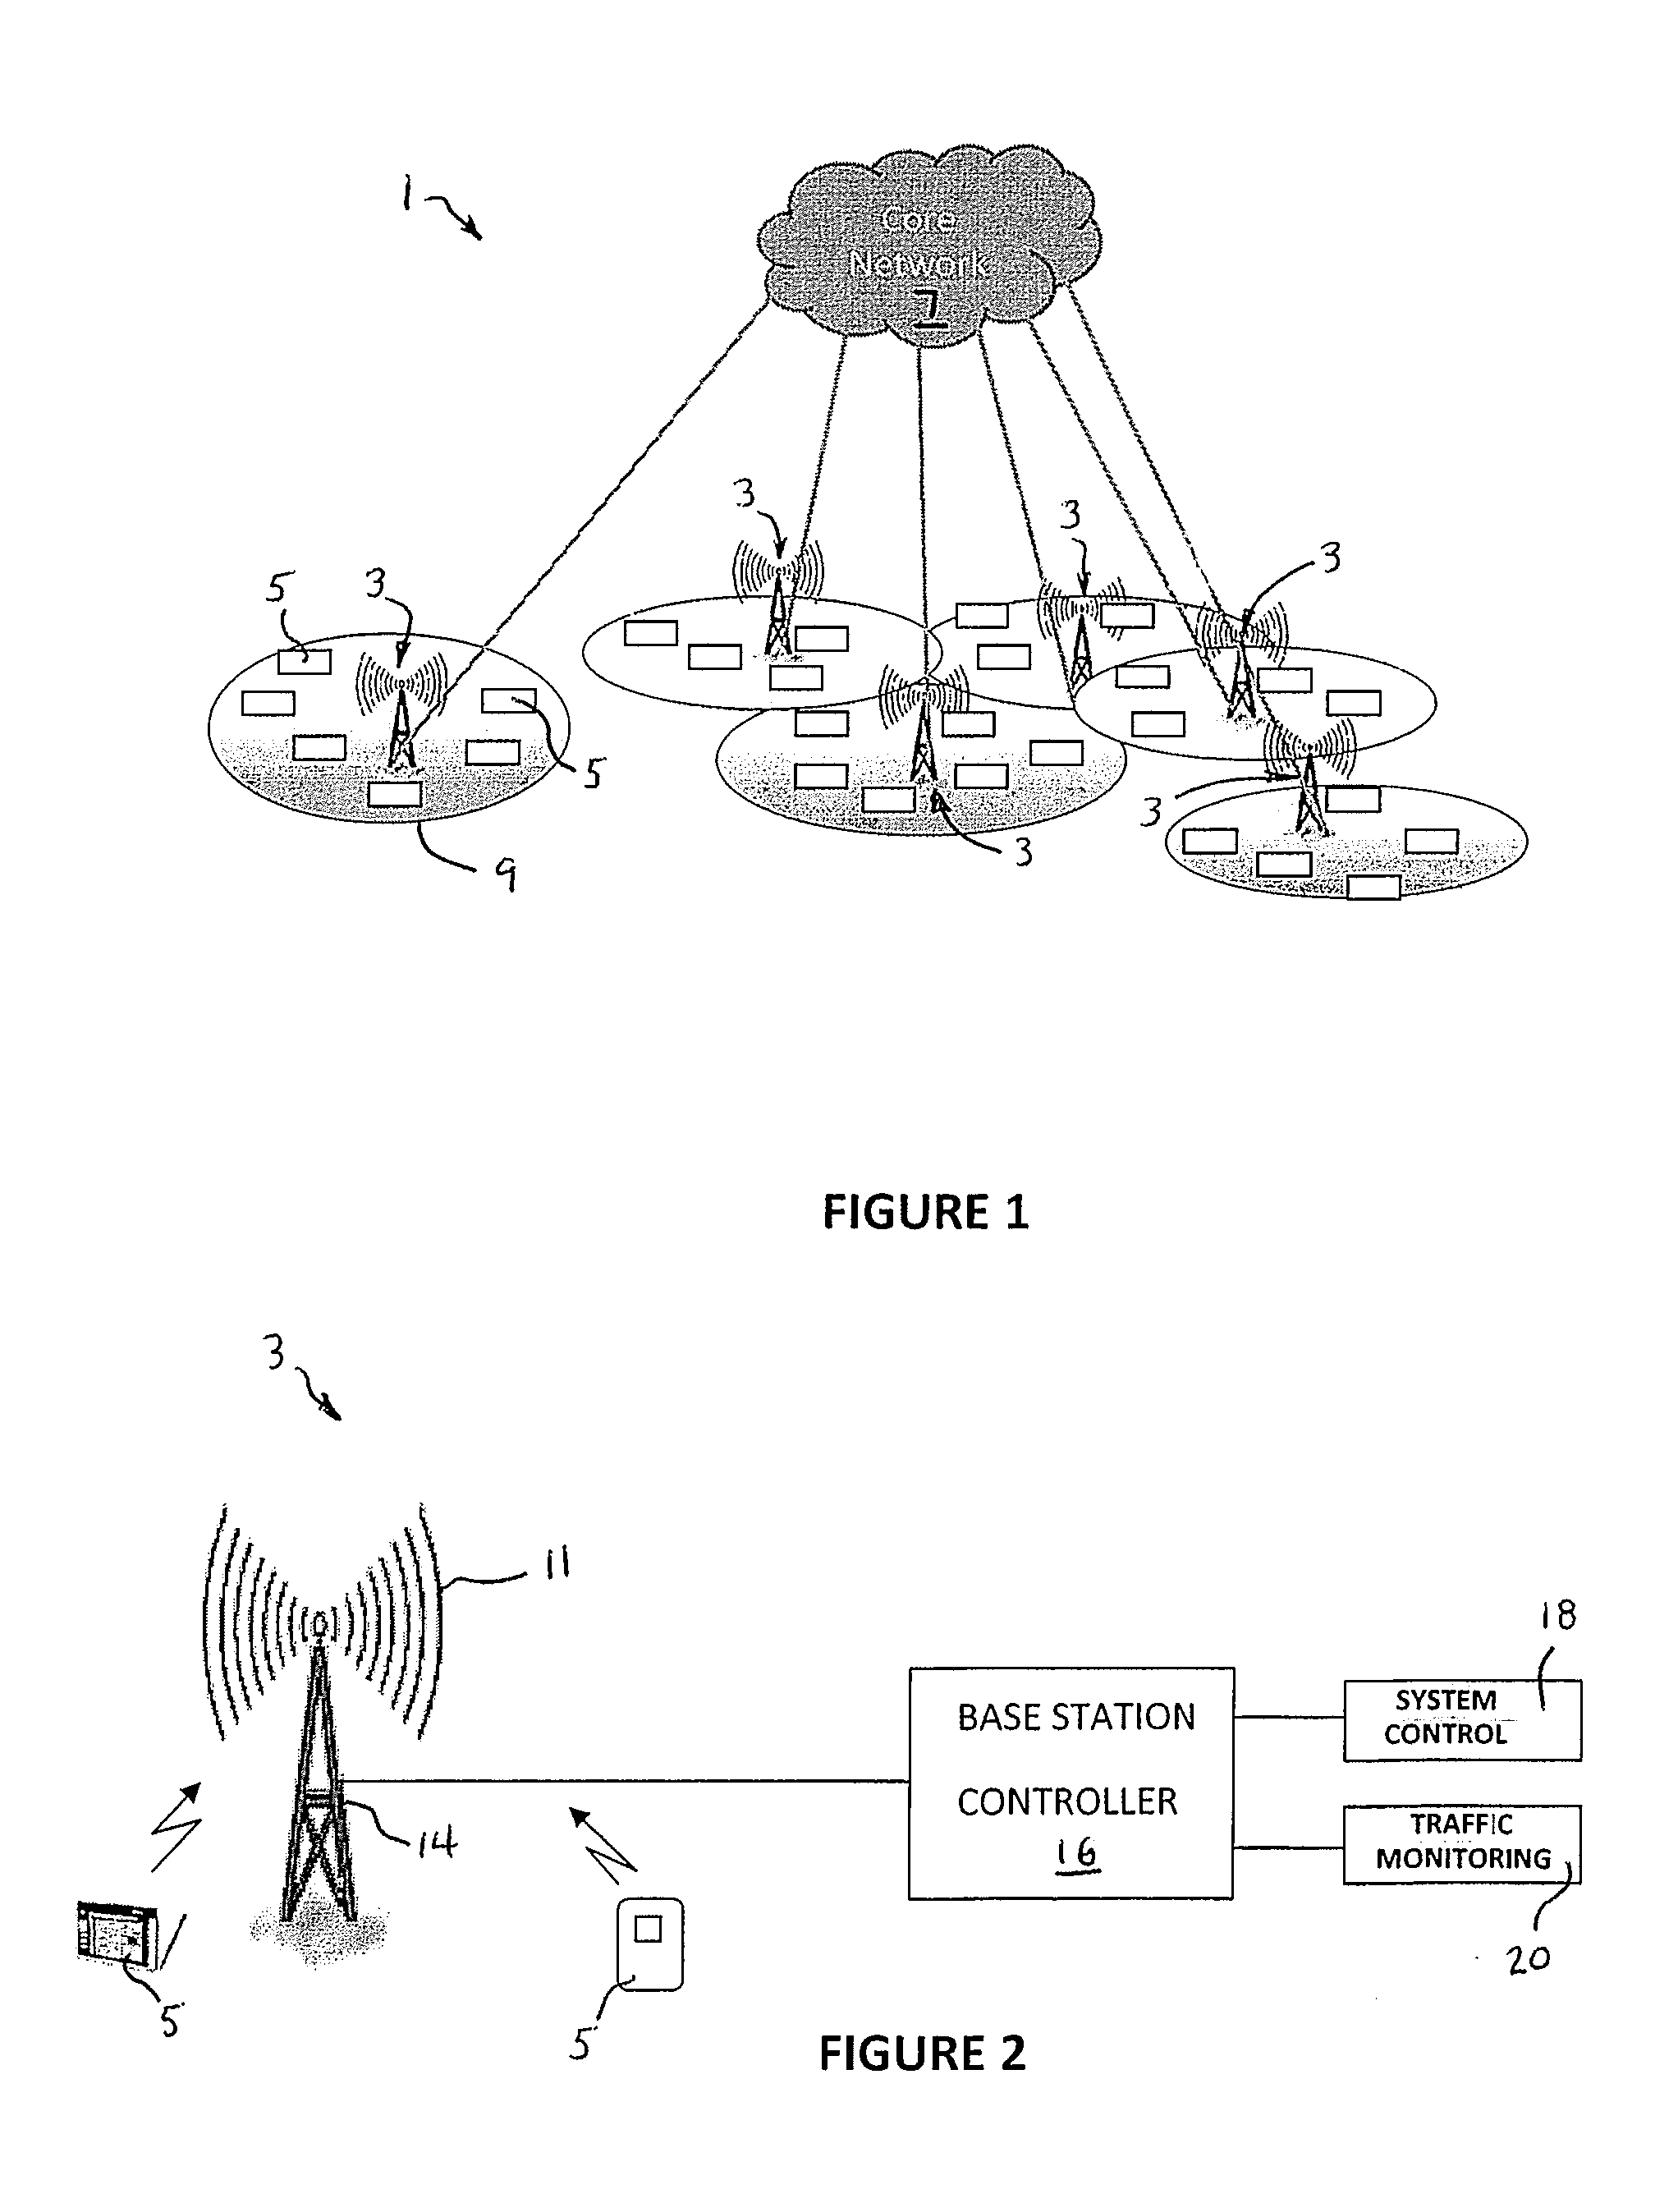 System and method for dynamically balancing a maximum number of active remote device users between base stations